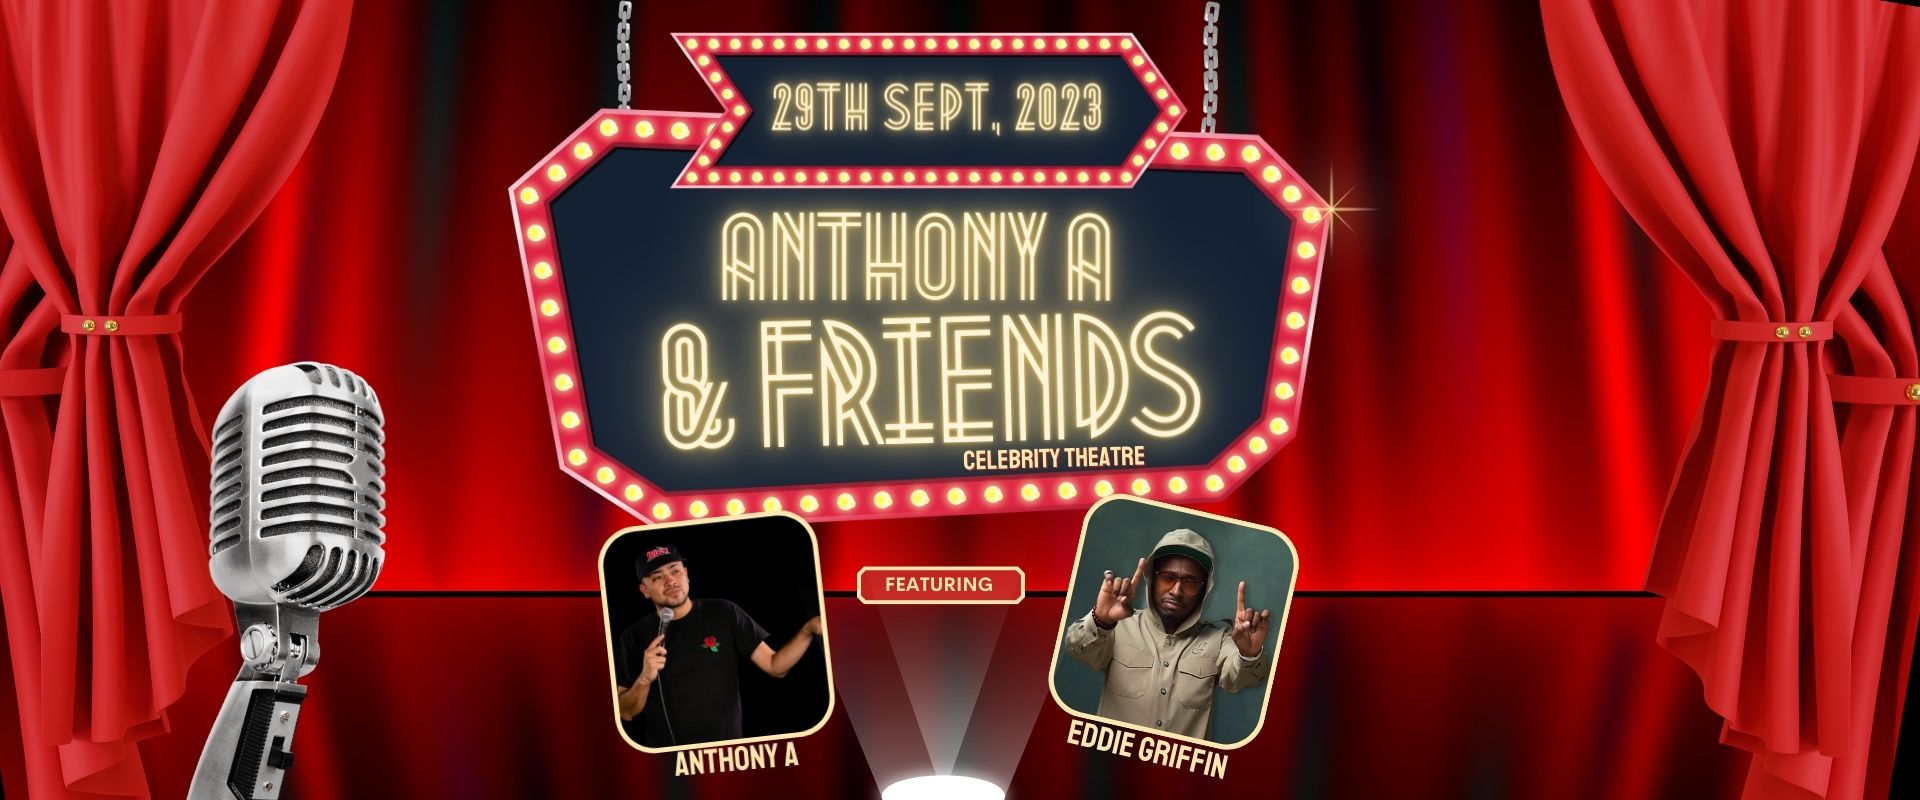 Anthony A & Friends (960 × 400 px) (2)